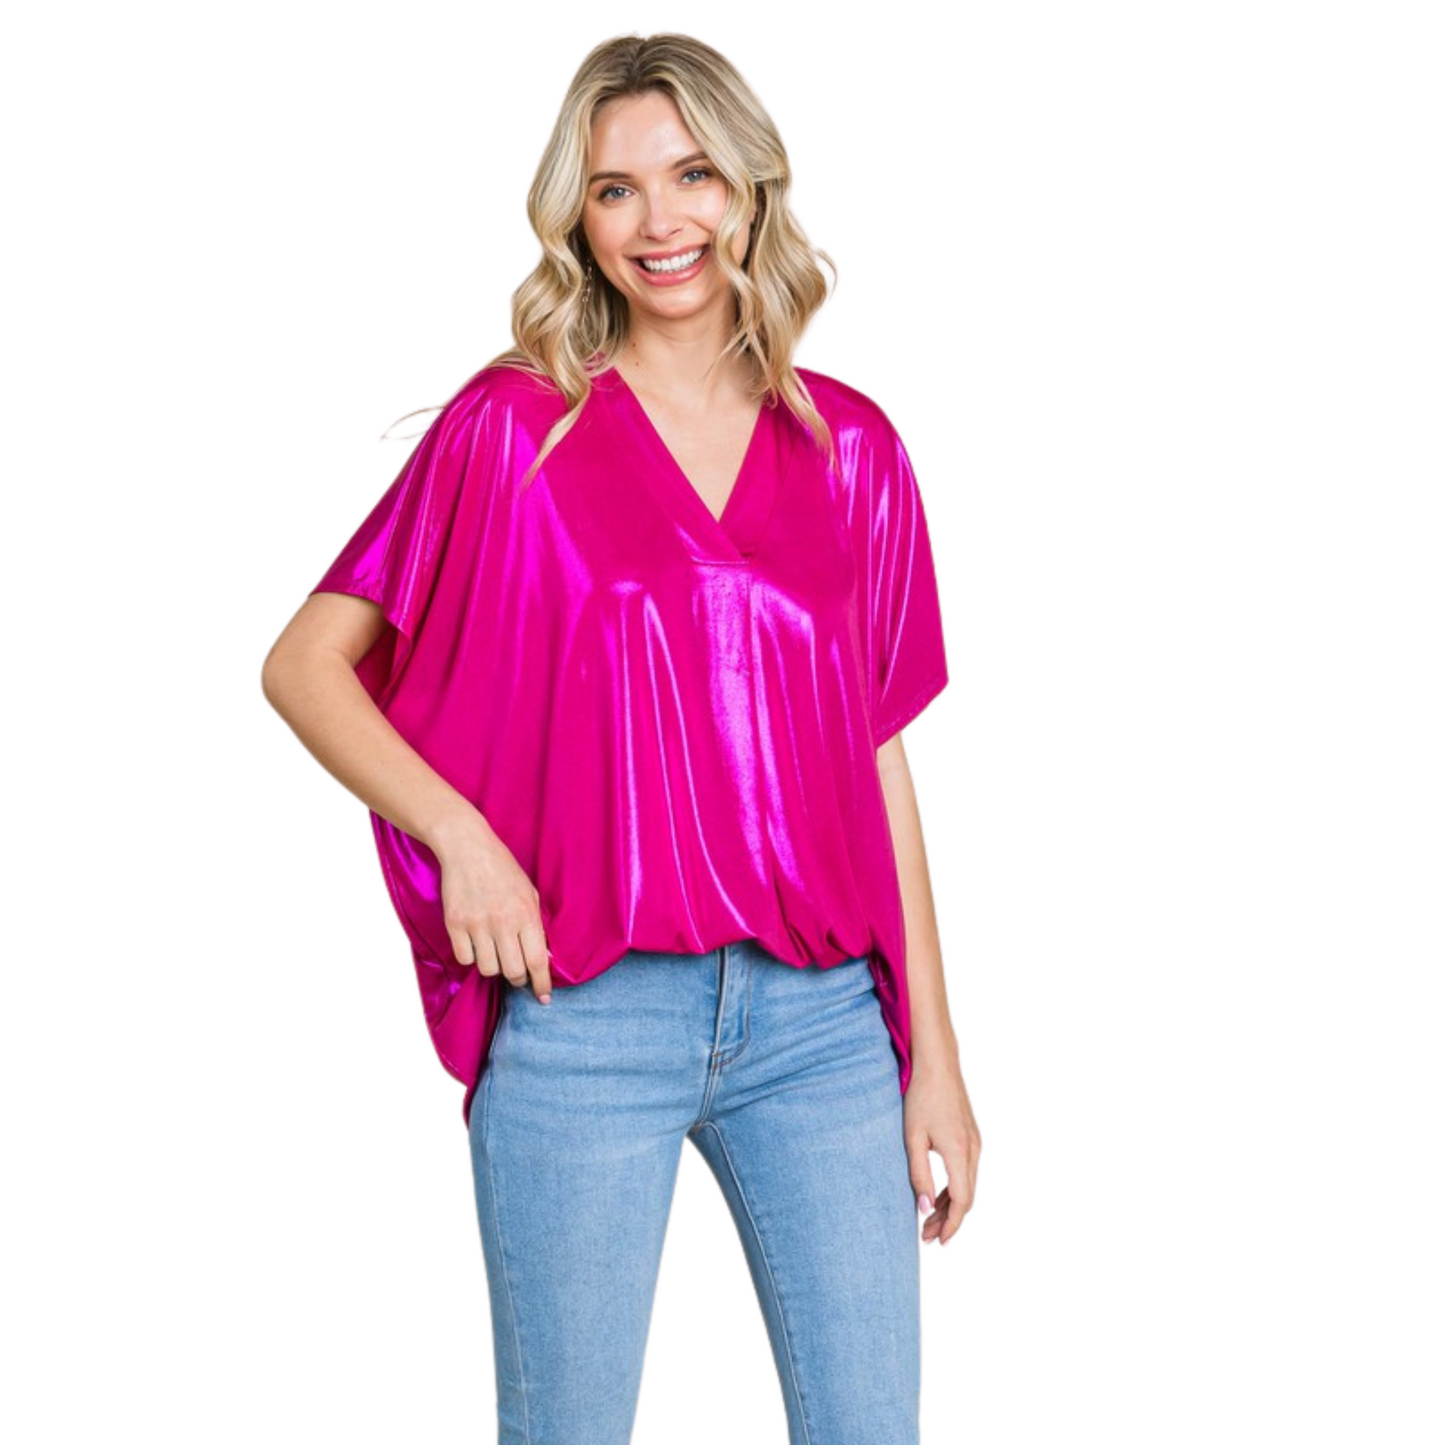 <p>Add effortless glamour to any look with our Shiny Solid V-Neck Boxy Top. Available in both fuchsia and violet, this lightweight and flowy design features a v-neck neckline and short sleeves for an effortlessly stylish finish. The shimmery fabric is perfect for day or night.</p> <p>&nbsp;</p>